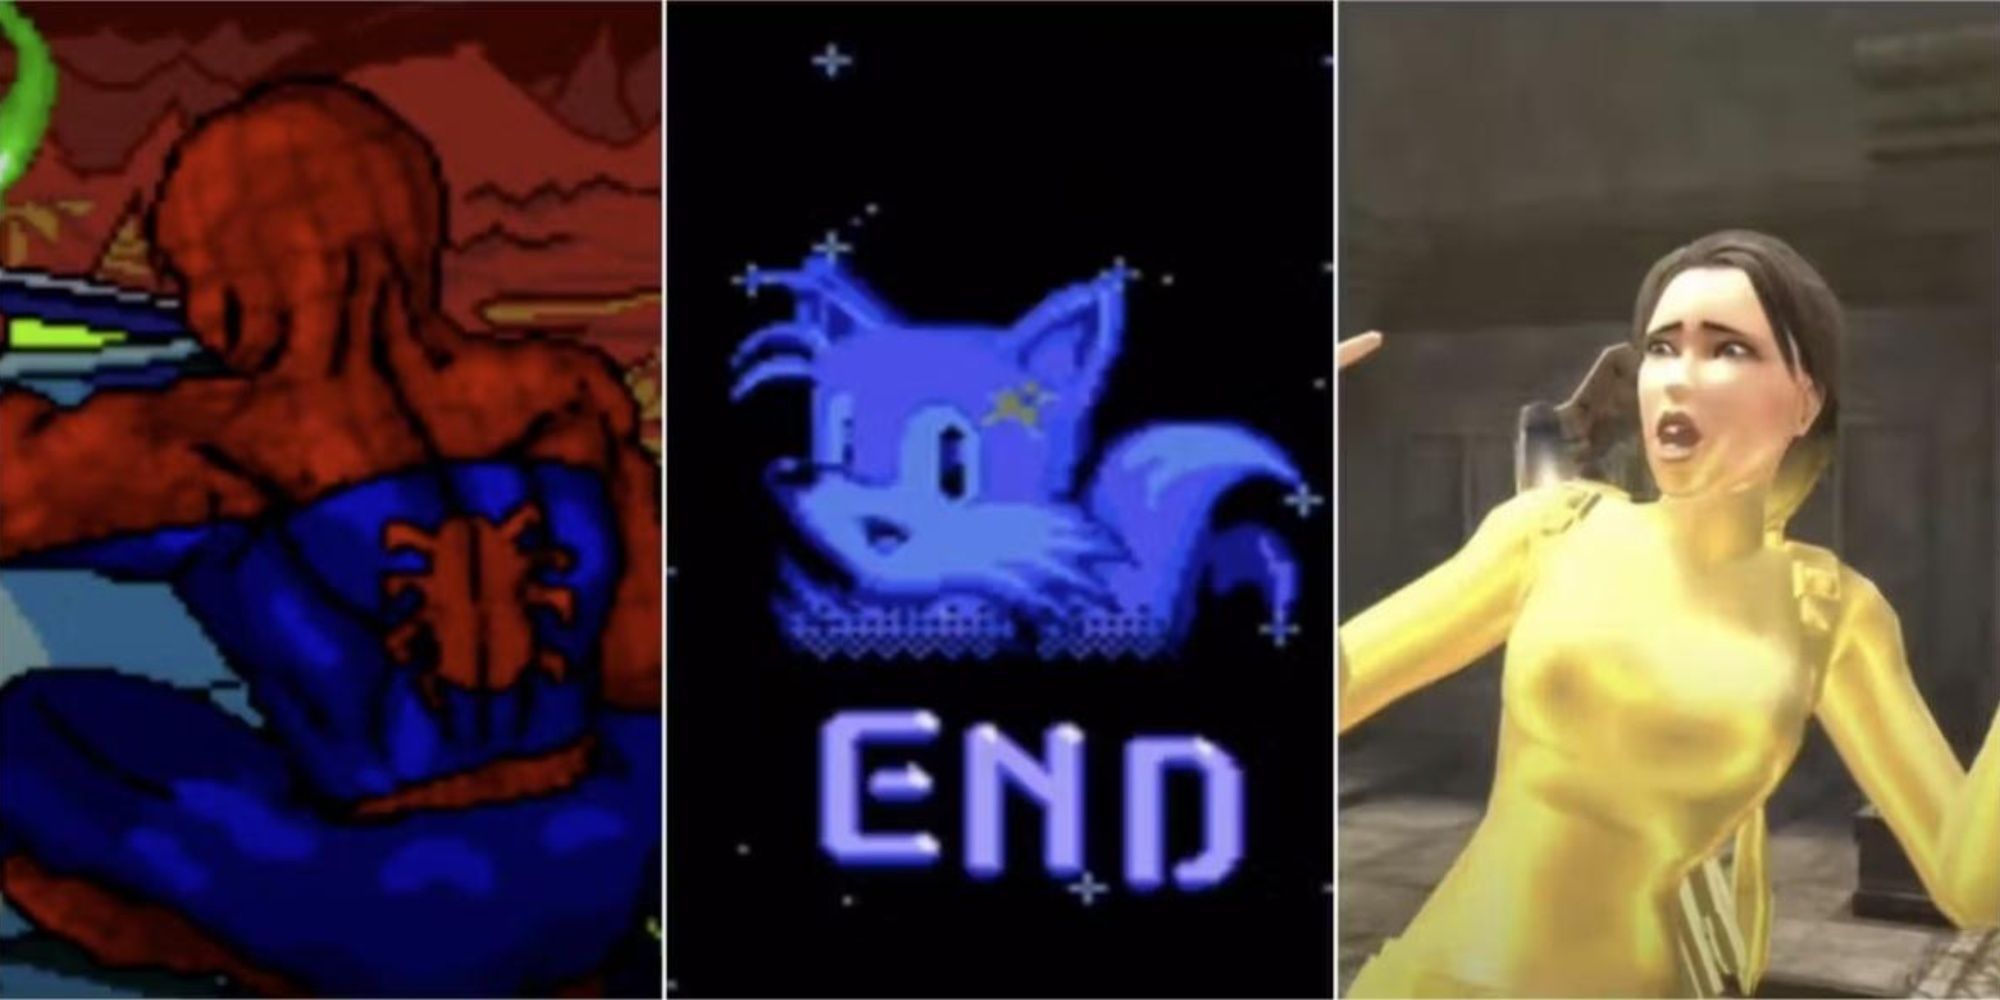 Spiderman, Tails and Lara Croft turning into gold.